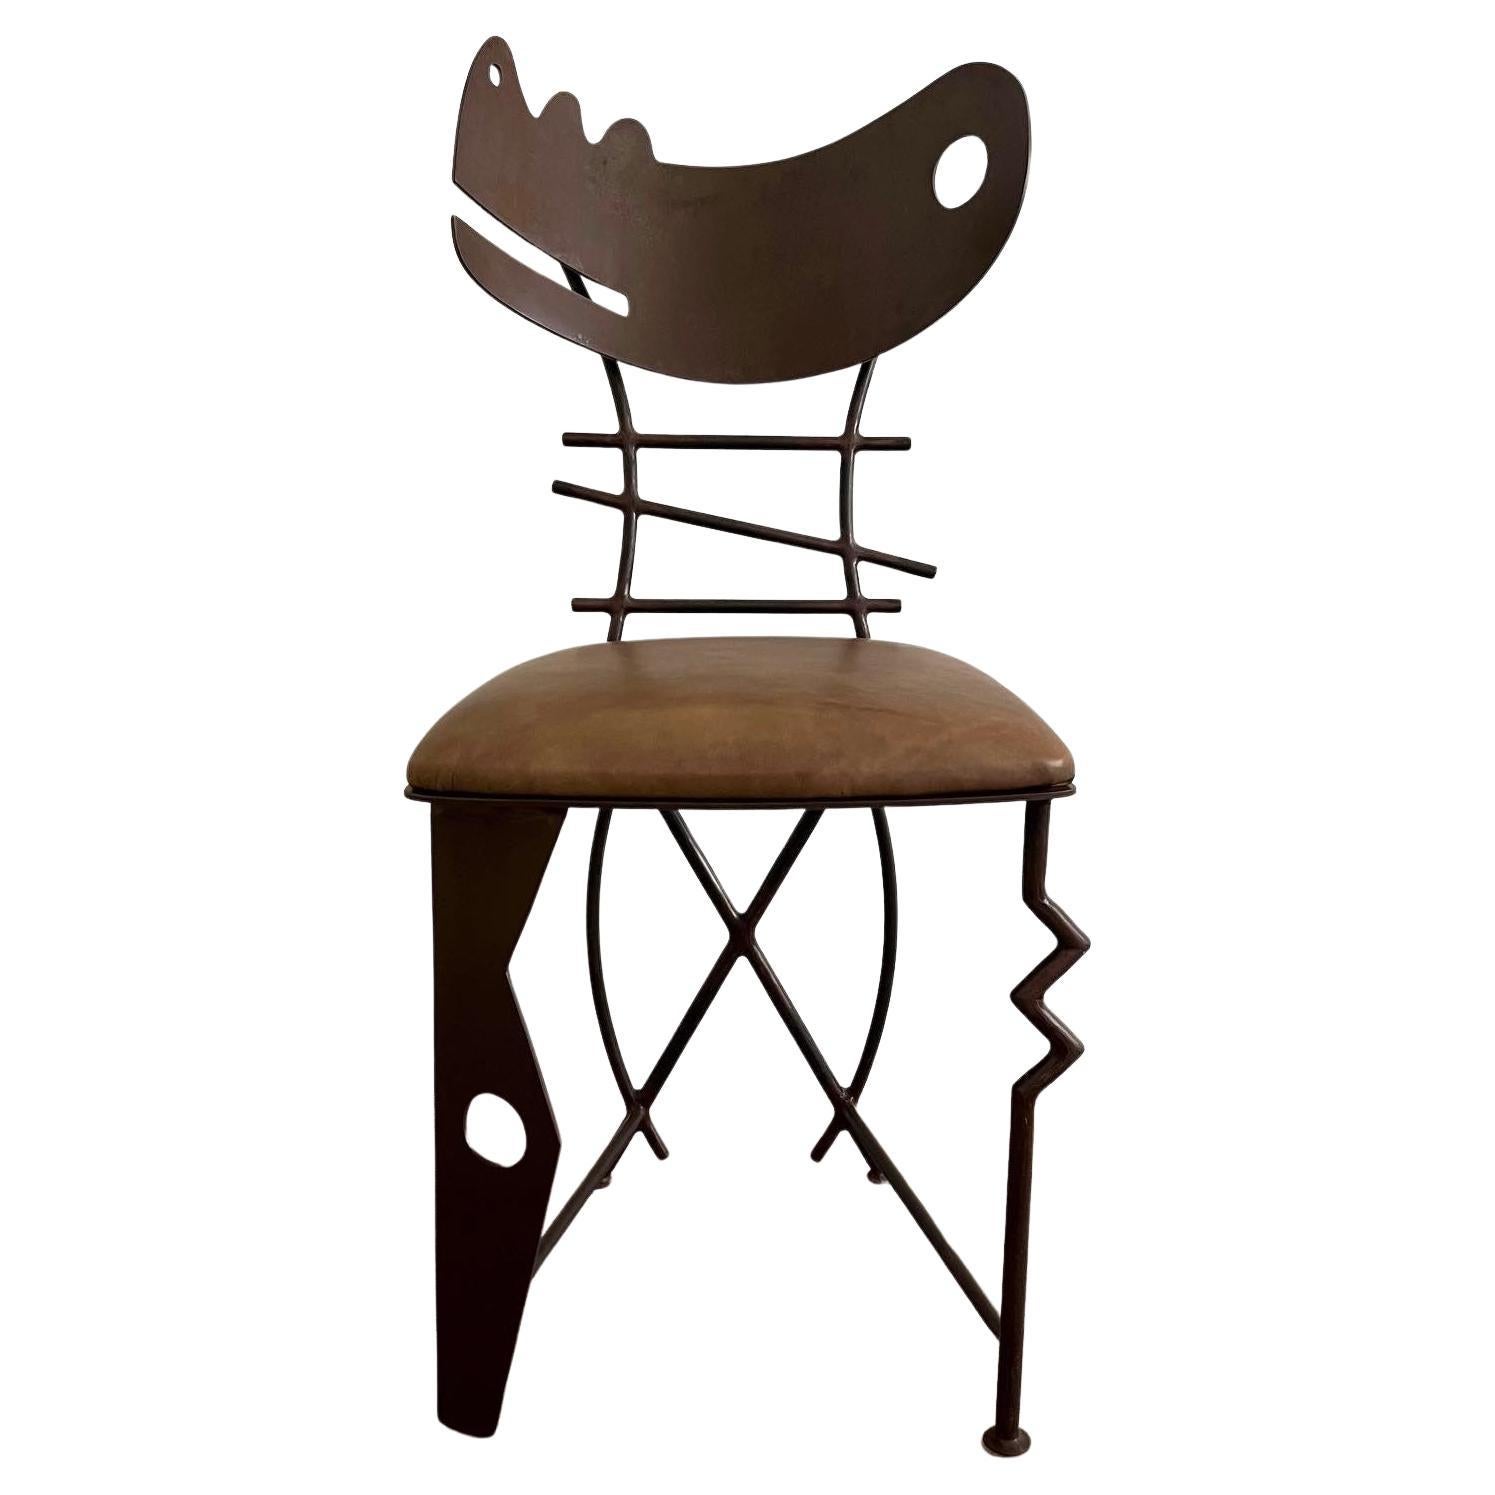 Gregory Hawthorne Sculpted Iron Modernist Chair